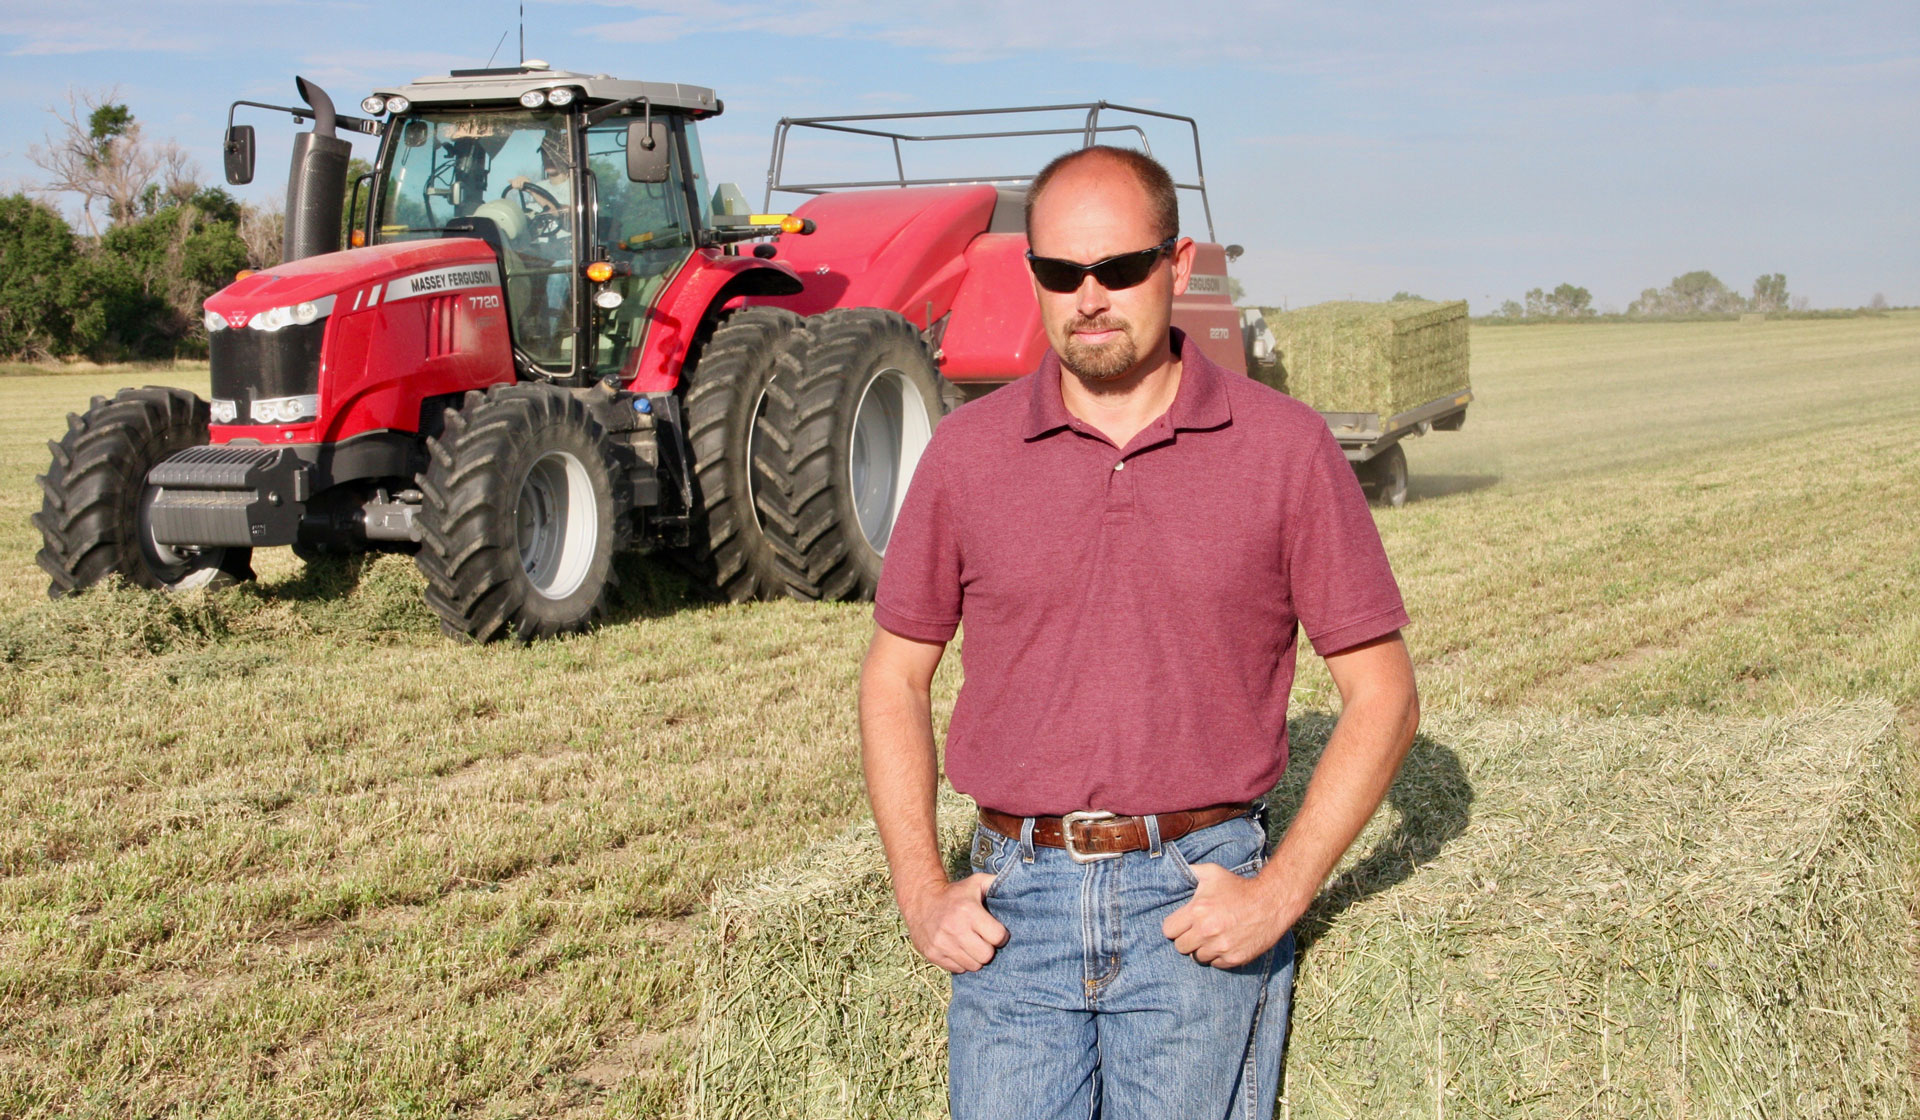 Farmer Rex Reyher stands in front of his red Hesston by Massey Ferguson 2270 baler.